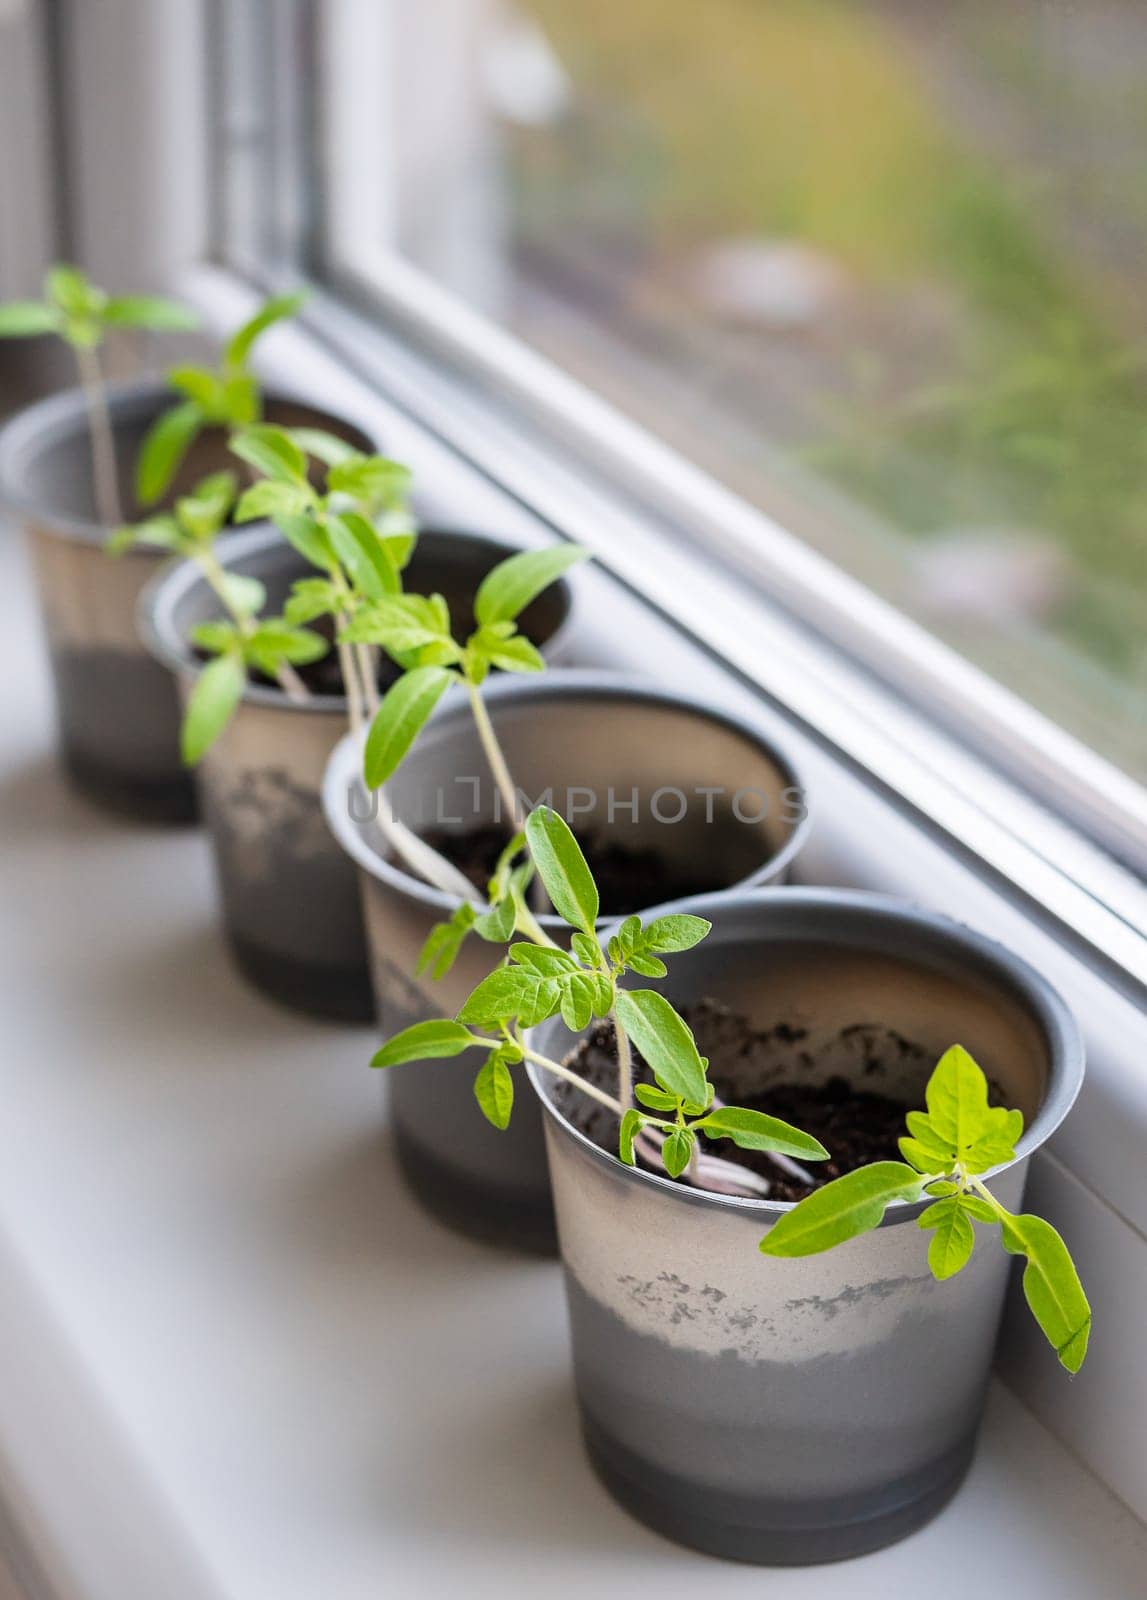 Growing vegetables on the windowsill in the house, young tomatoes in plastic cups on the window. Healthy seedlings, hobby gardening. Vertical photo